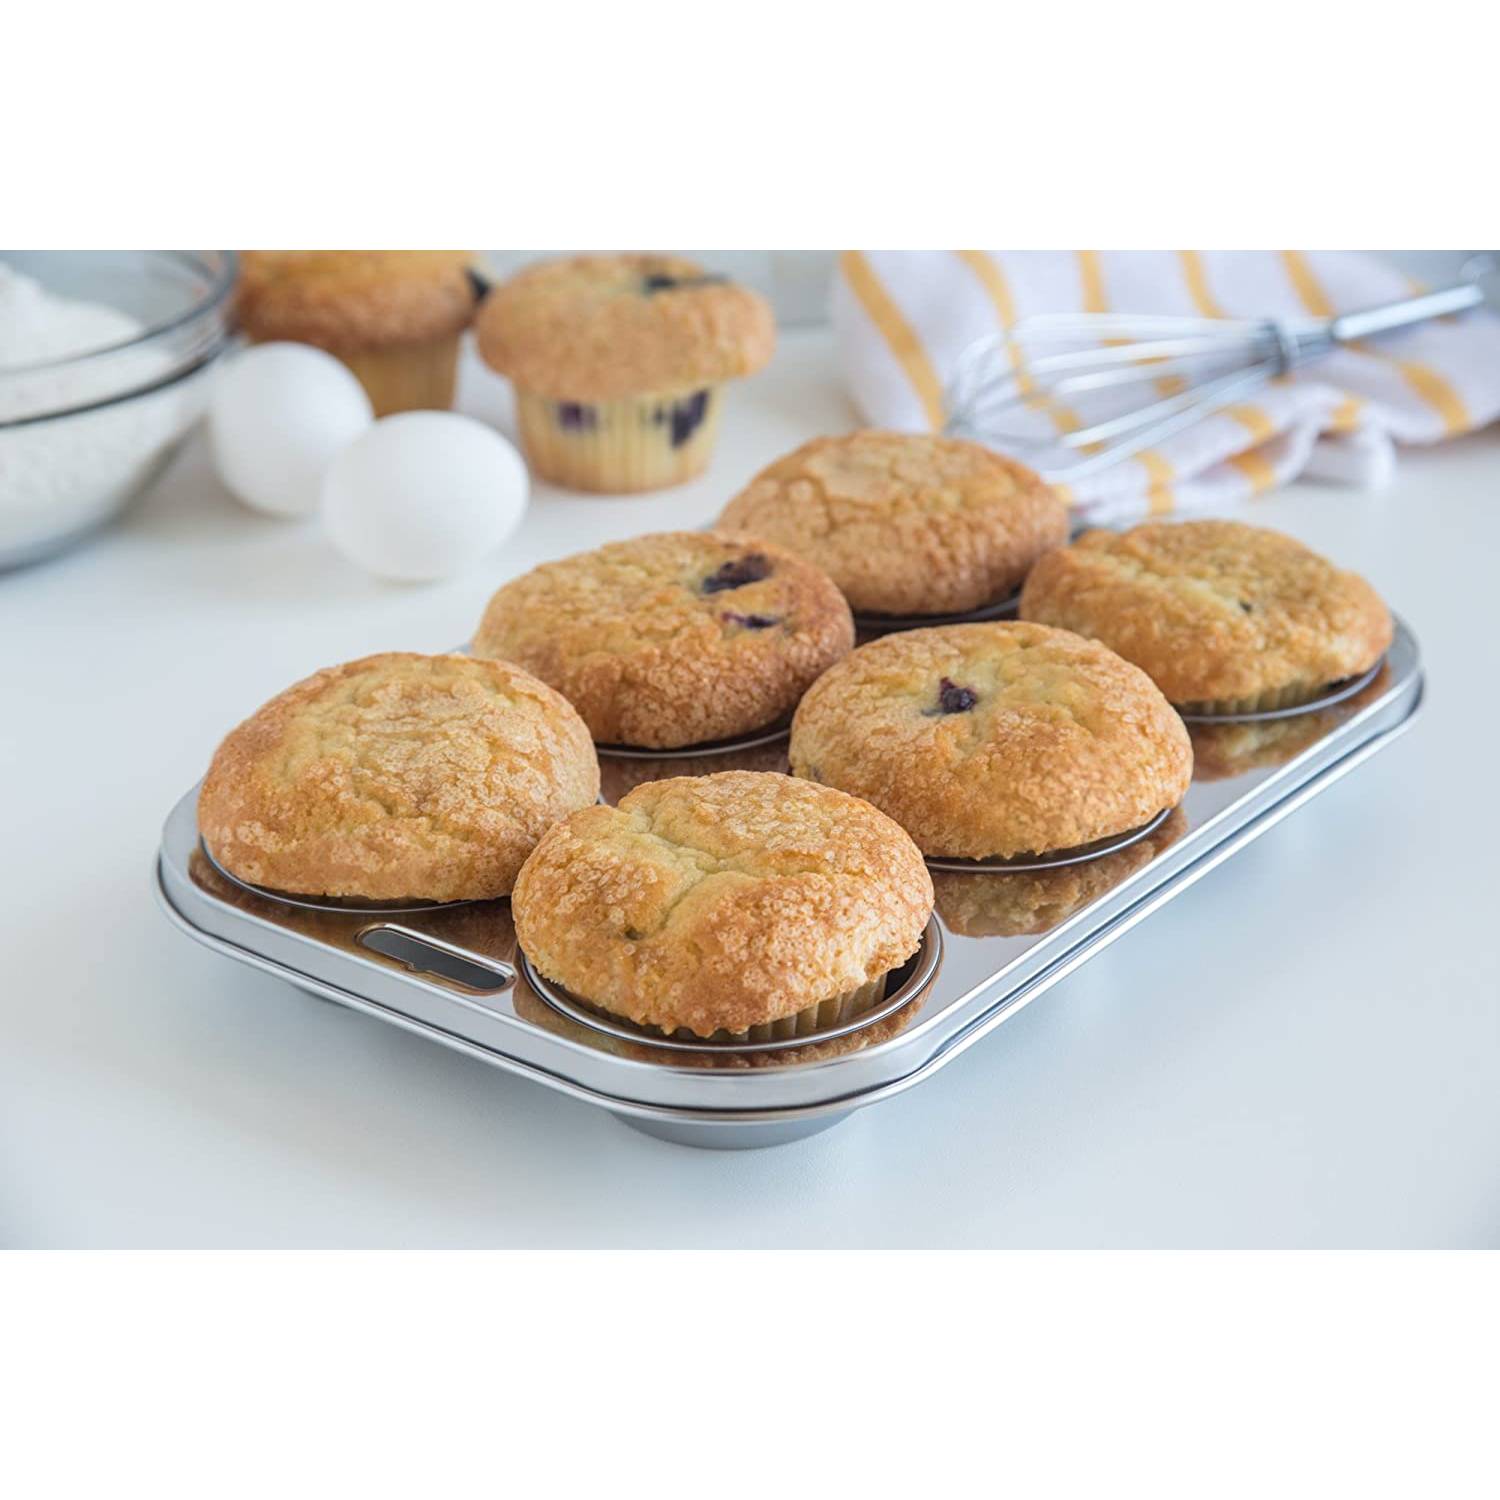 Fox Run 6 Cup Nonstick Stainless Steel Muffin Pan, 1.25 in Diameter Cups - image 2 of 2